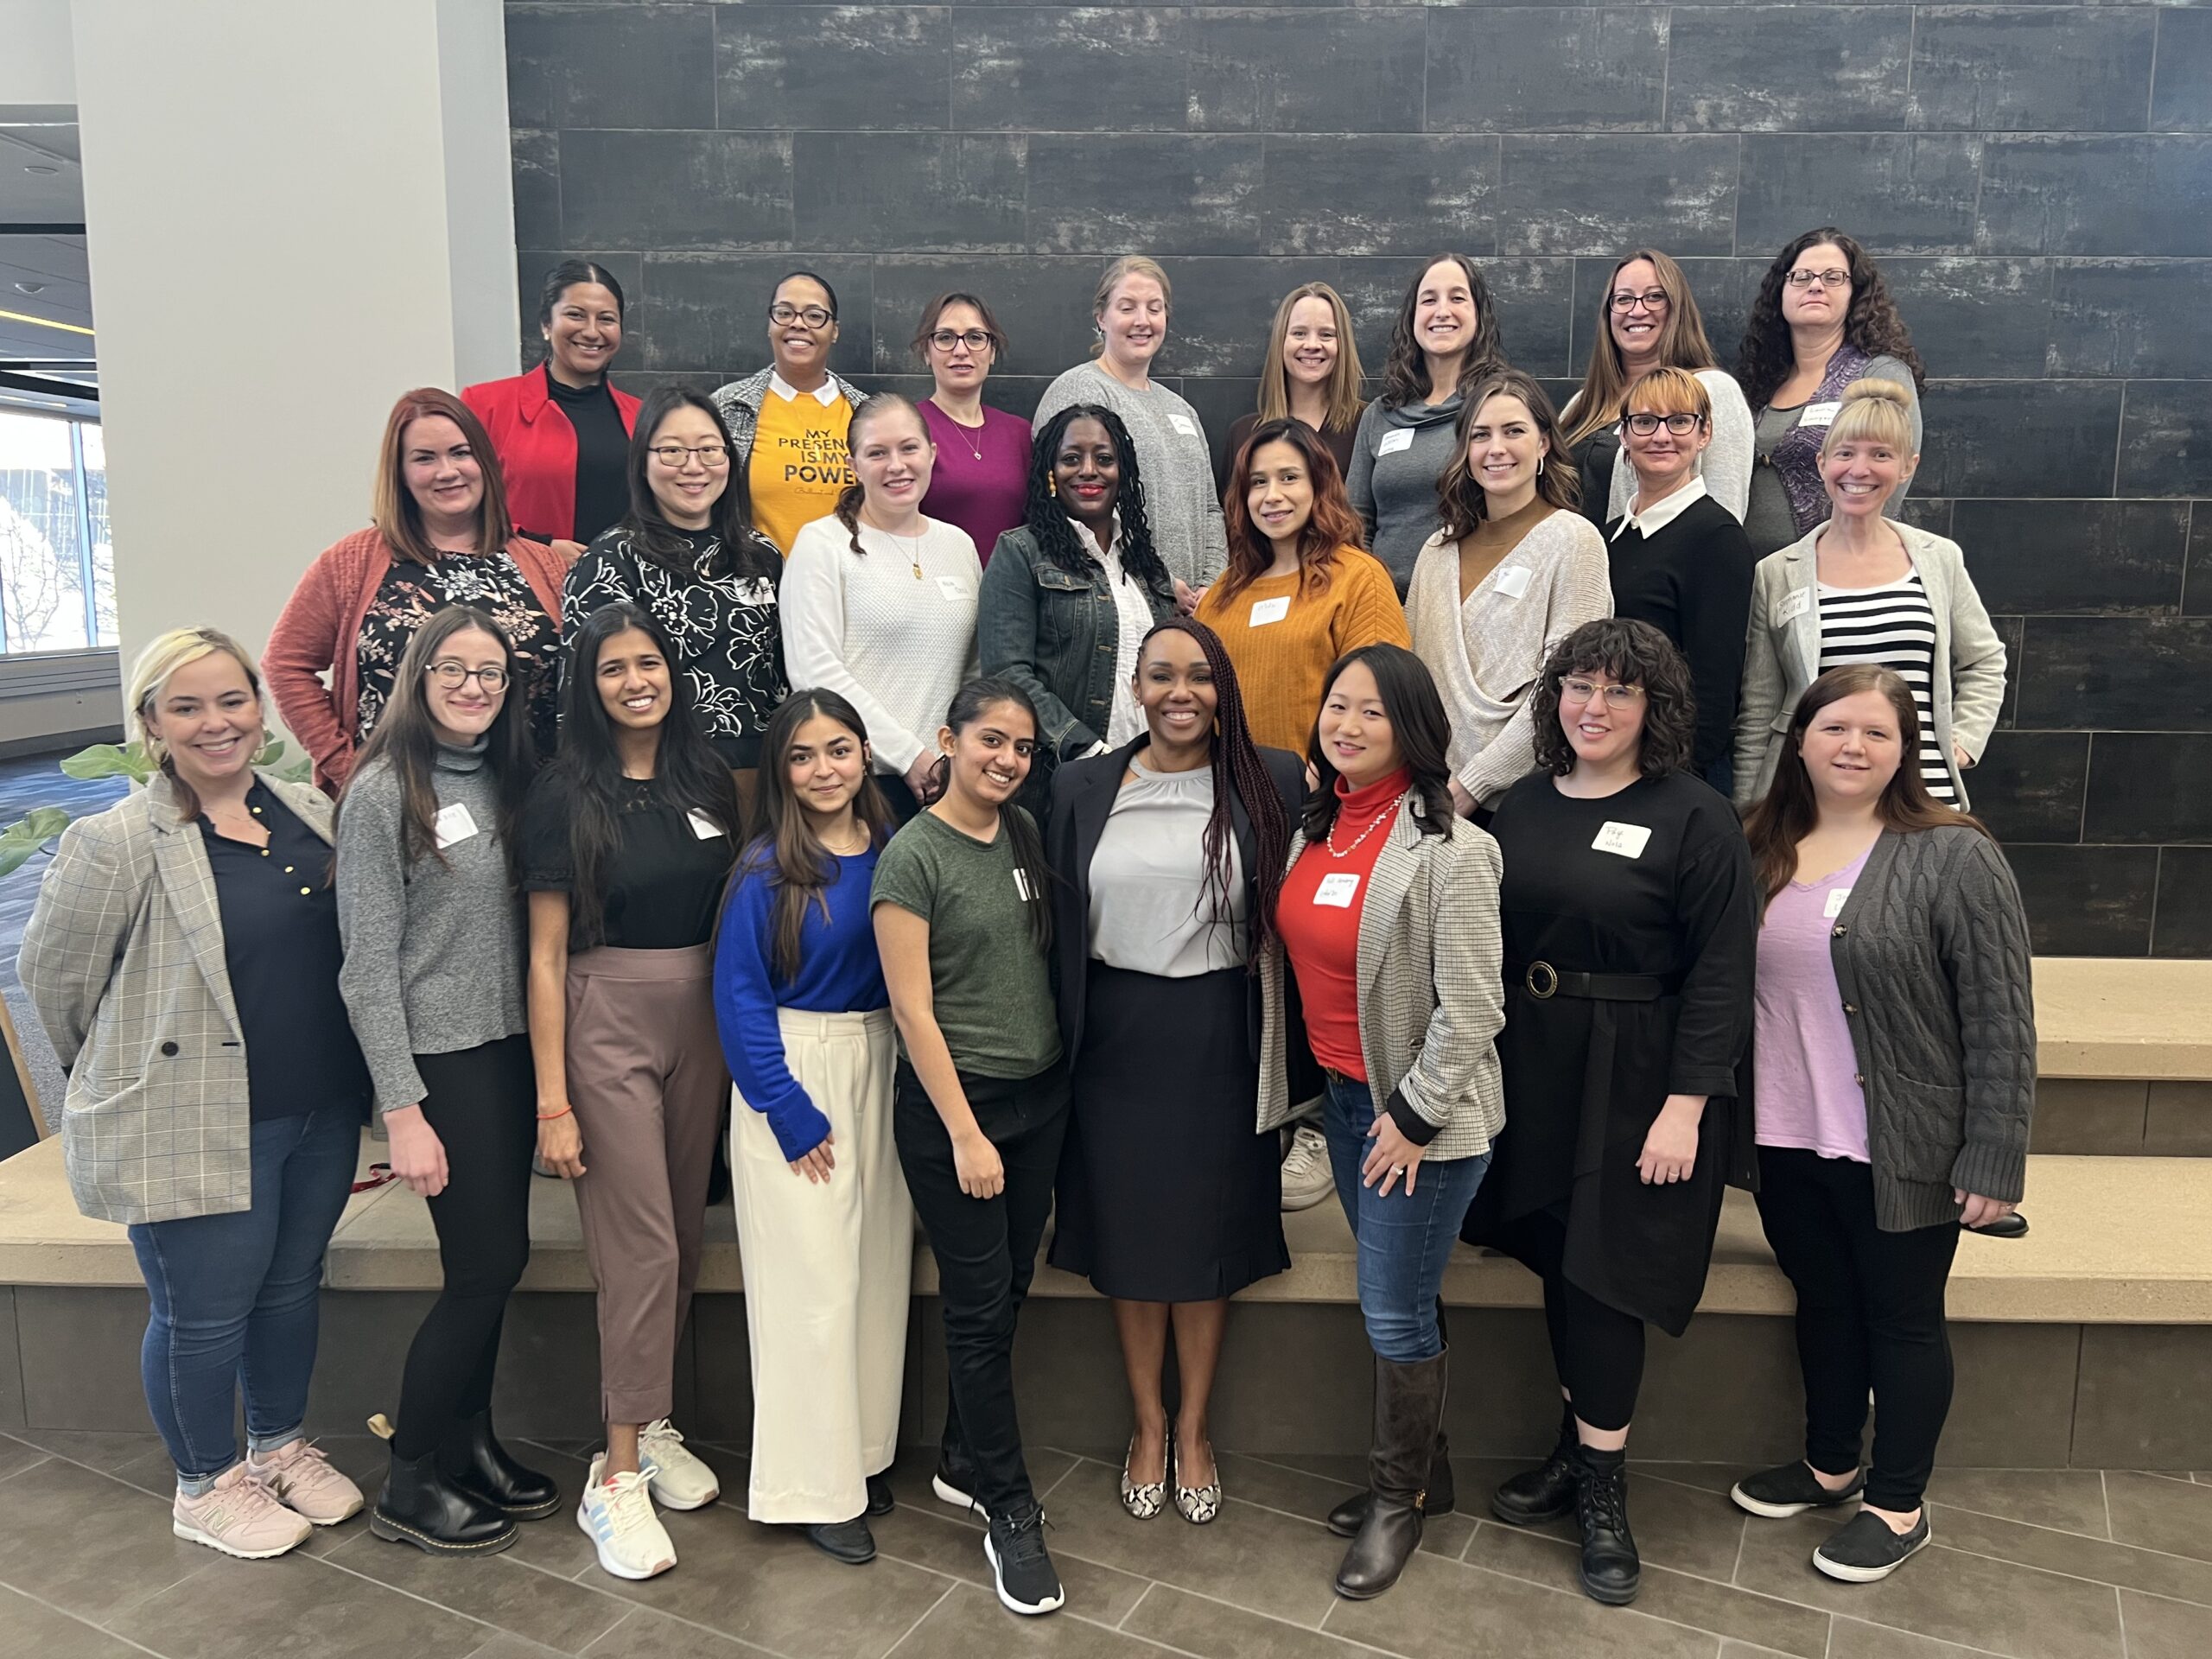 As part of a group of 24 women in STEAM fields, Erickson will have the opportunity to learn about entrepreneurship and meet with mentors during the program. (Photo courtesy UneTech Institute) 